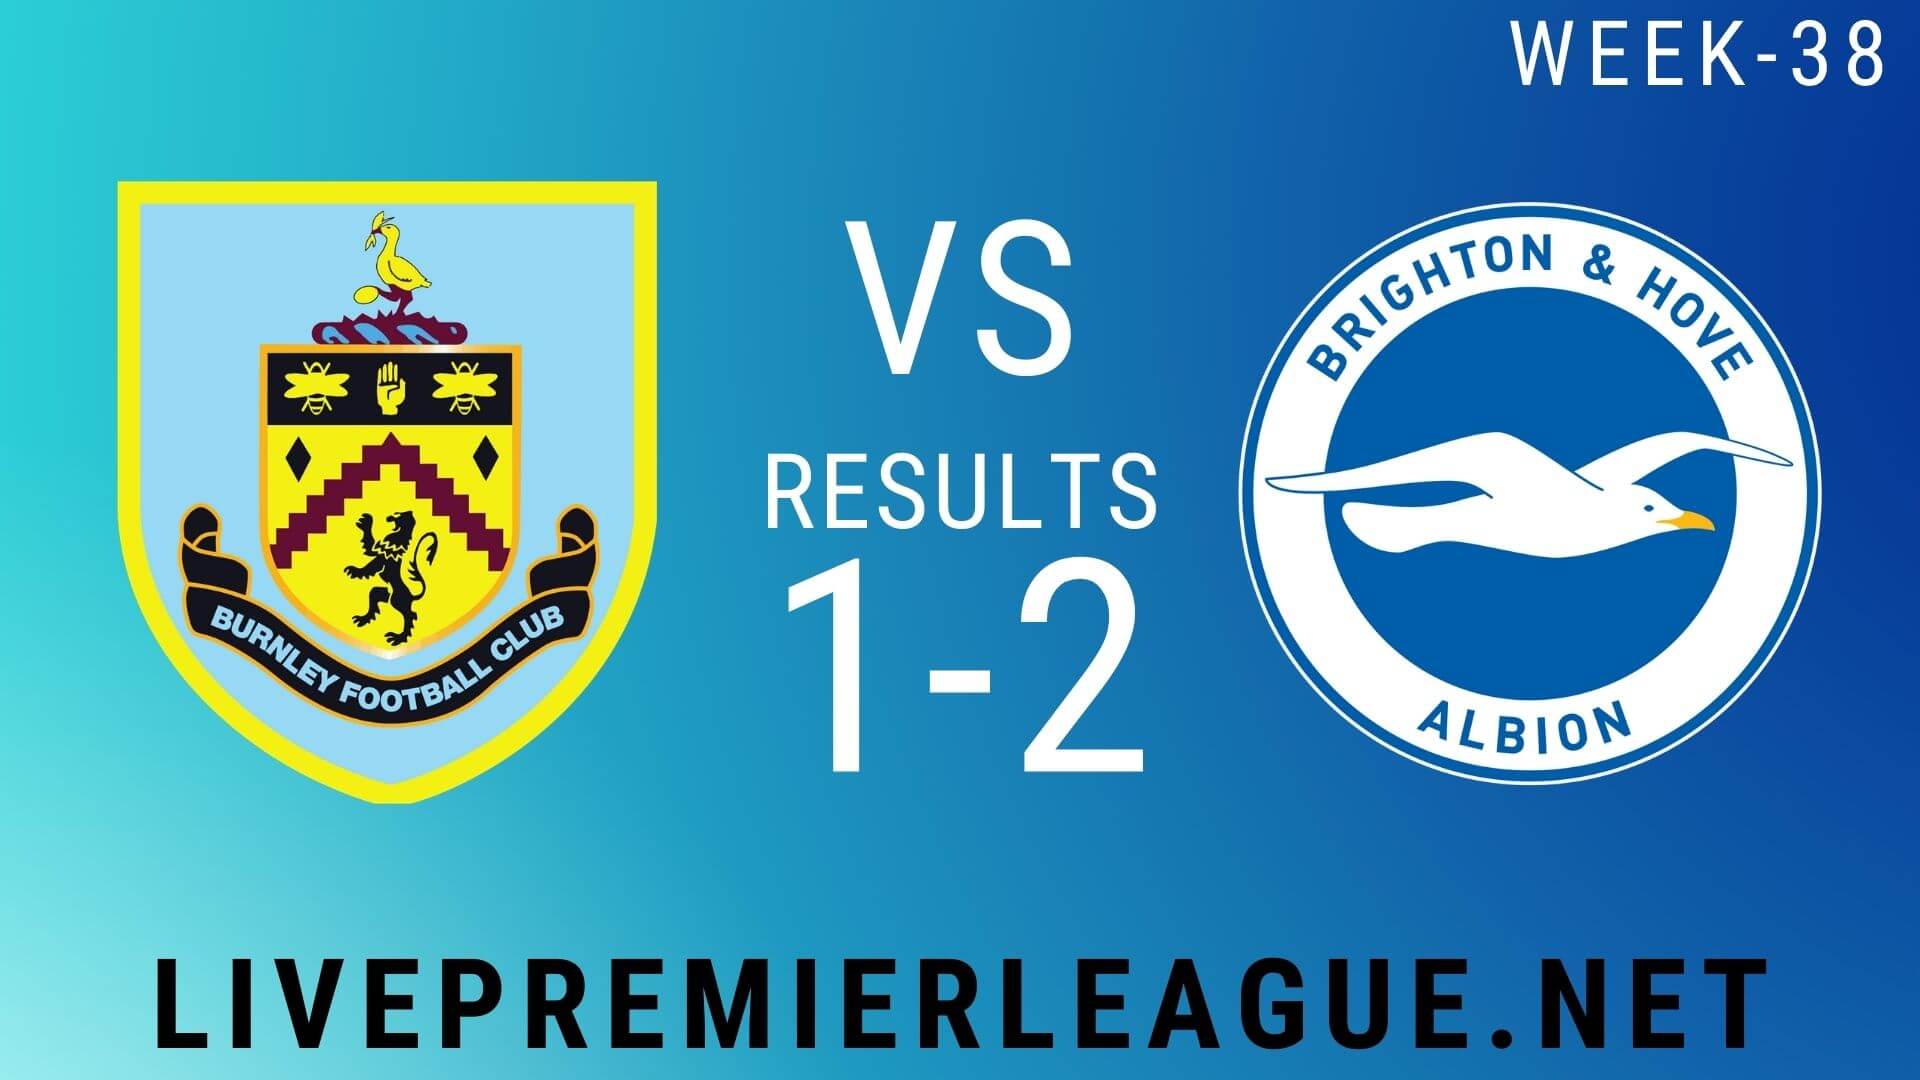 Burnley Vs Brighton and Hove Albion | Week 38 Result